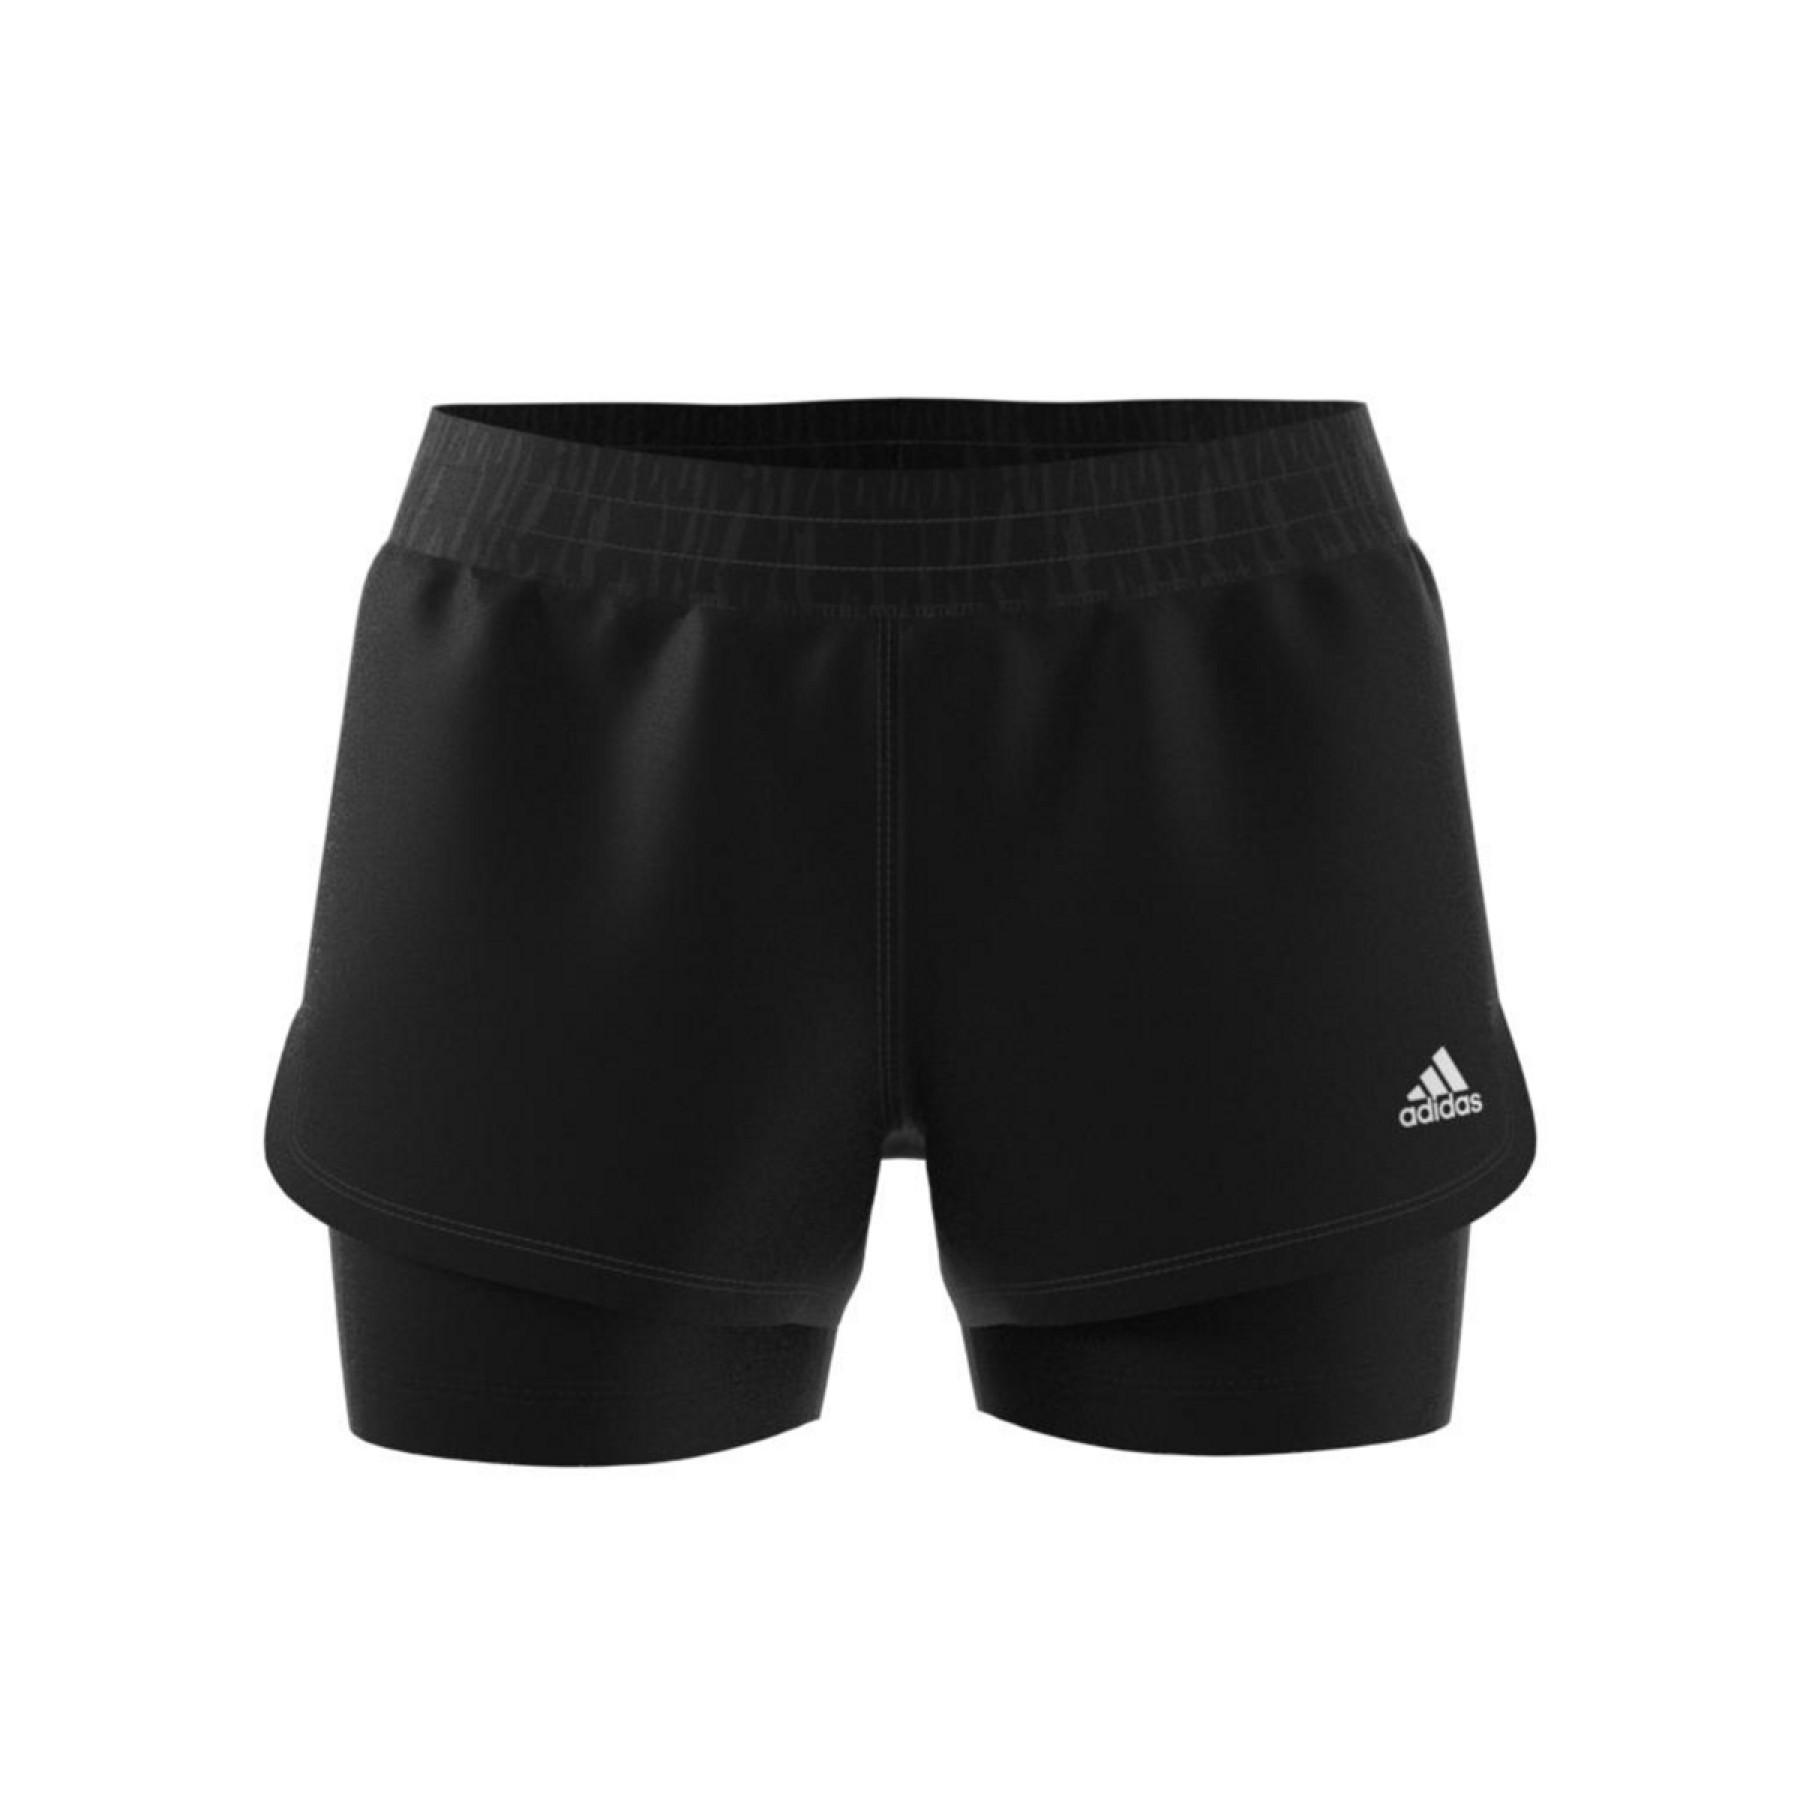 Pantaloncini da donna adidas Pacer 3 strisce Woven Two-in-One